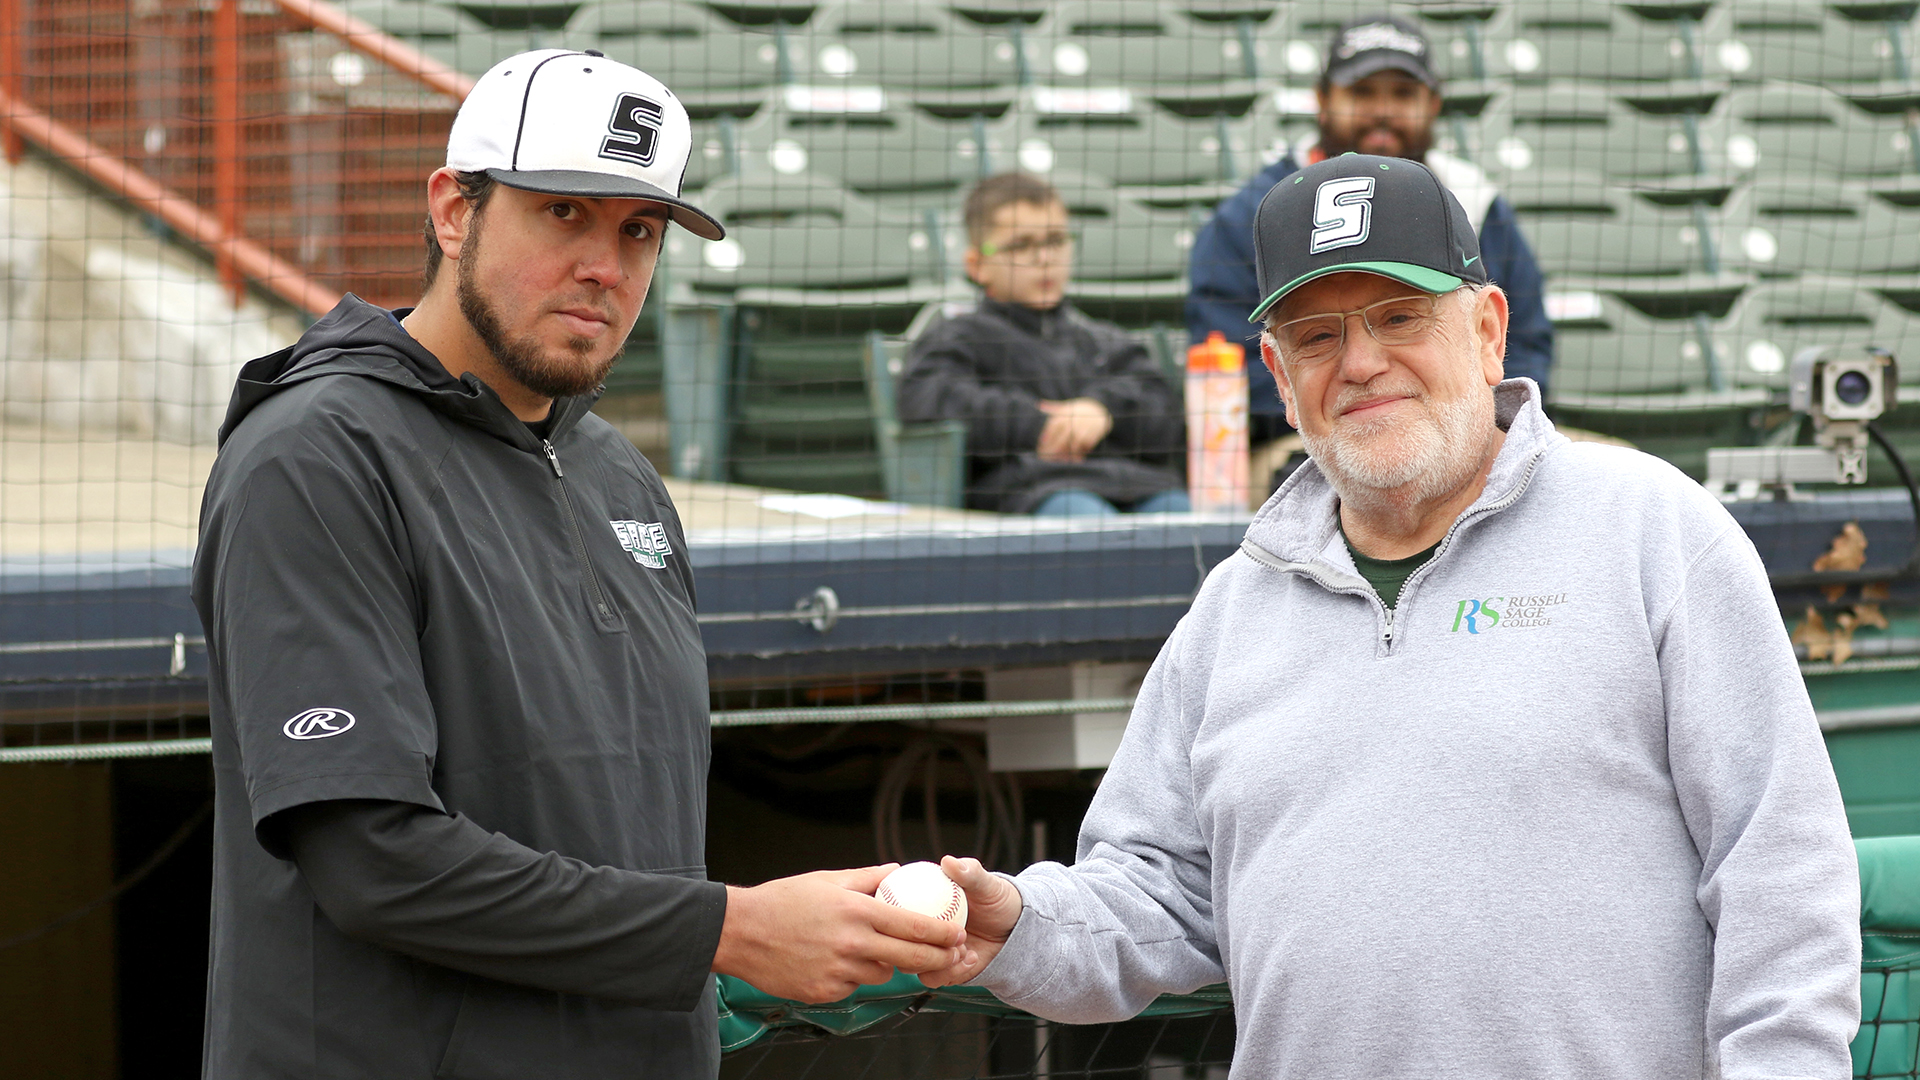 Russell Sage College Baseball Head Coach Nick Pontari and President Christopher Ames